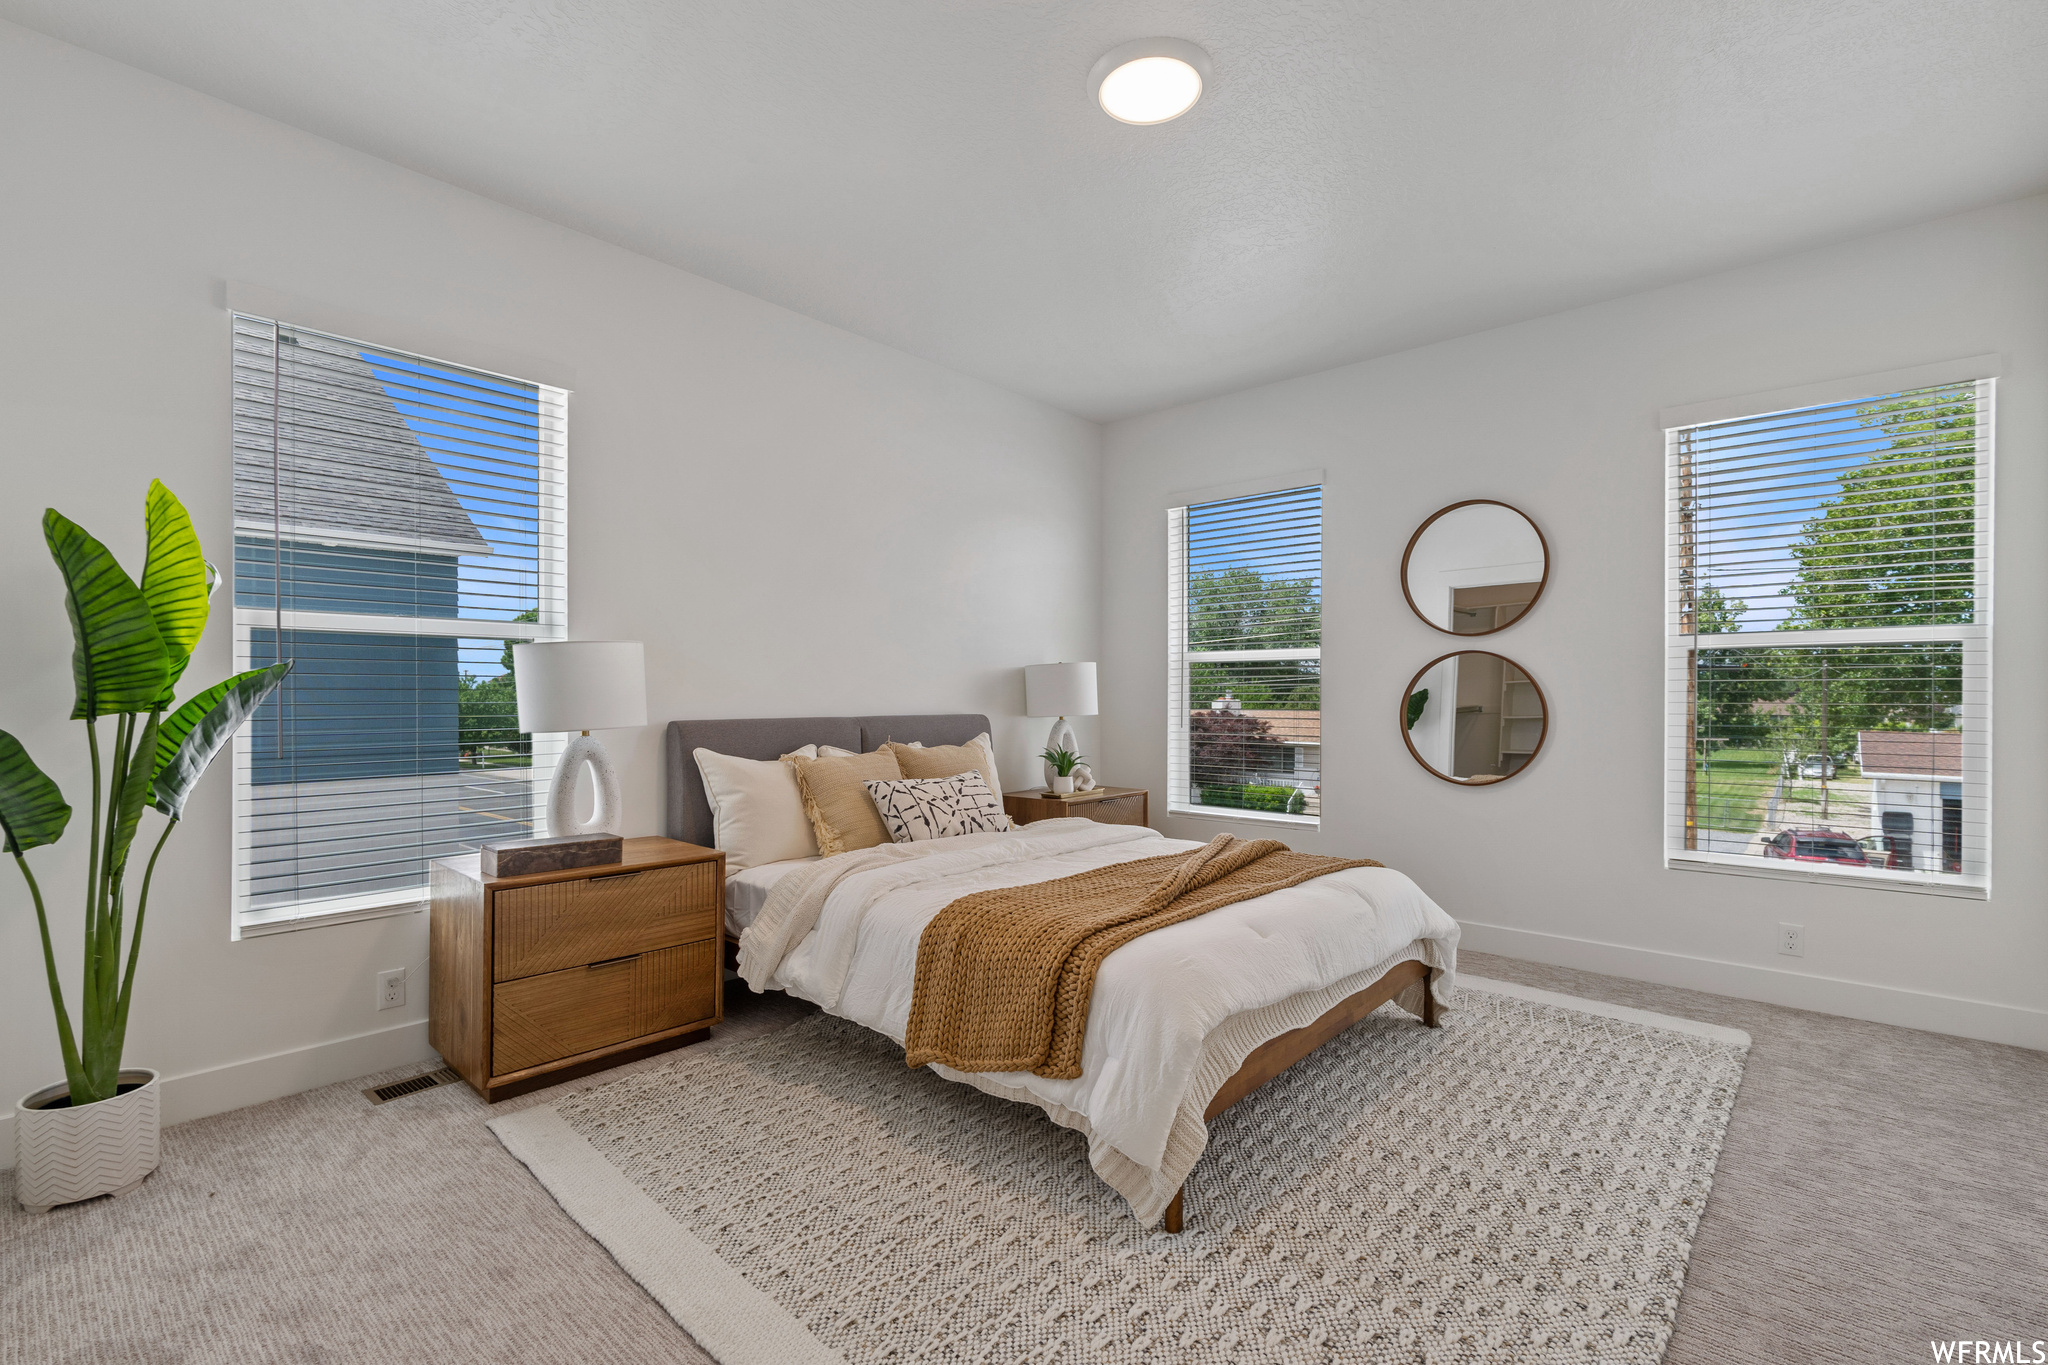 Bedroom with multiple windows and light carpet